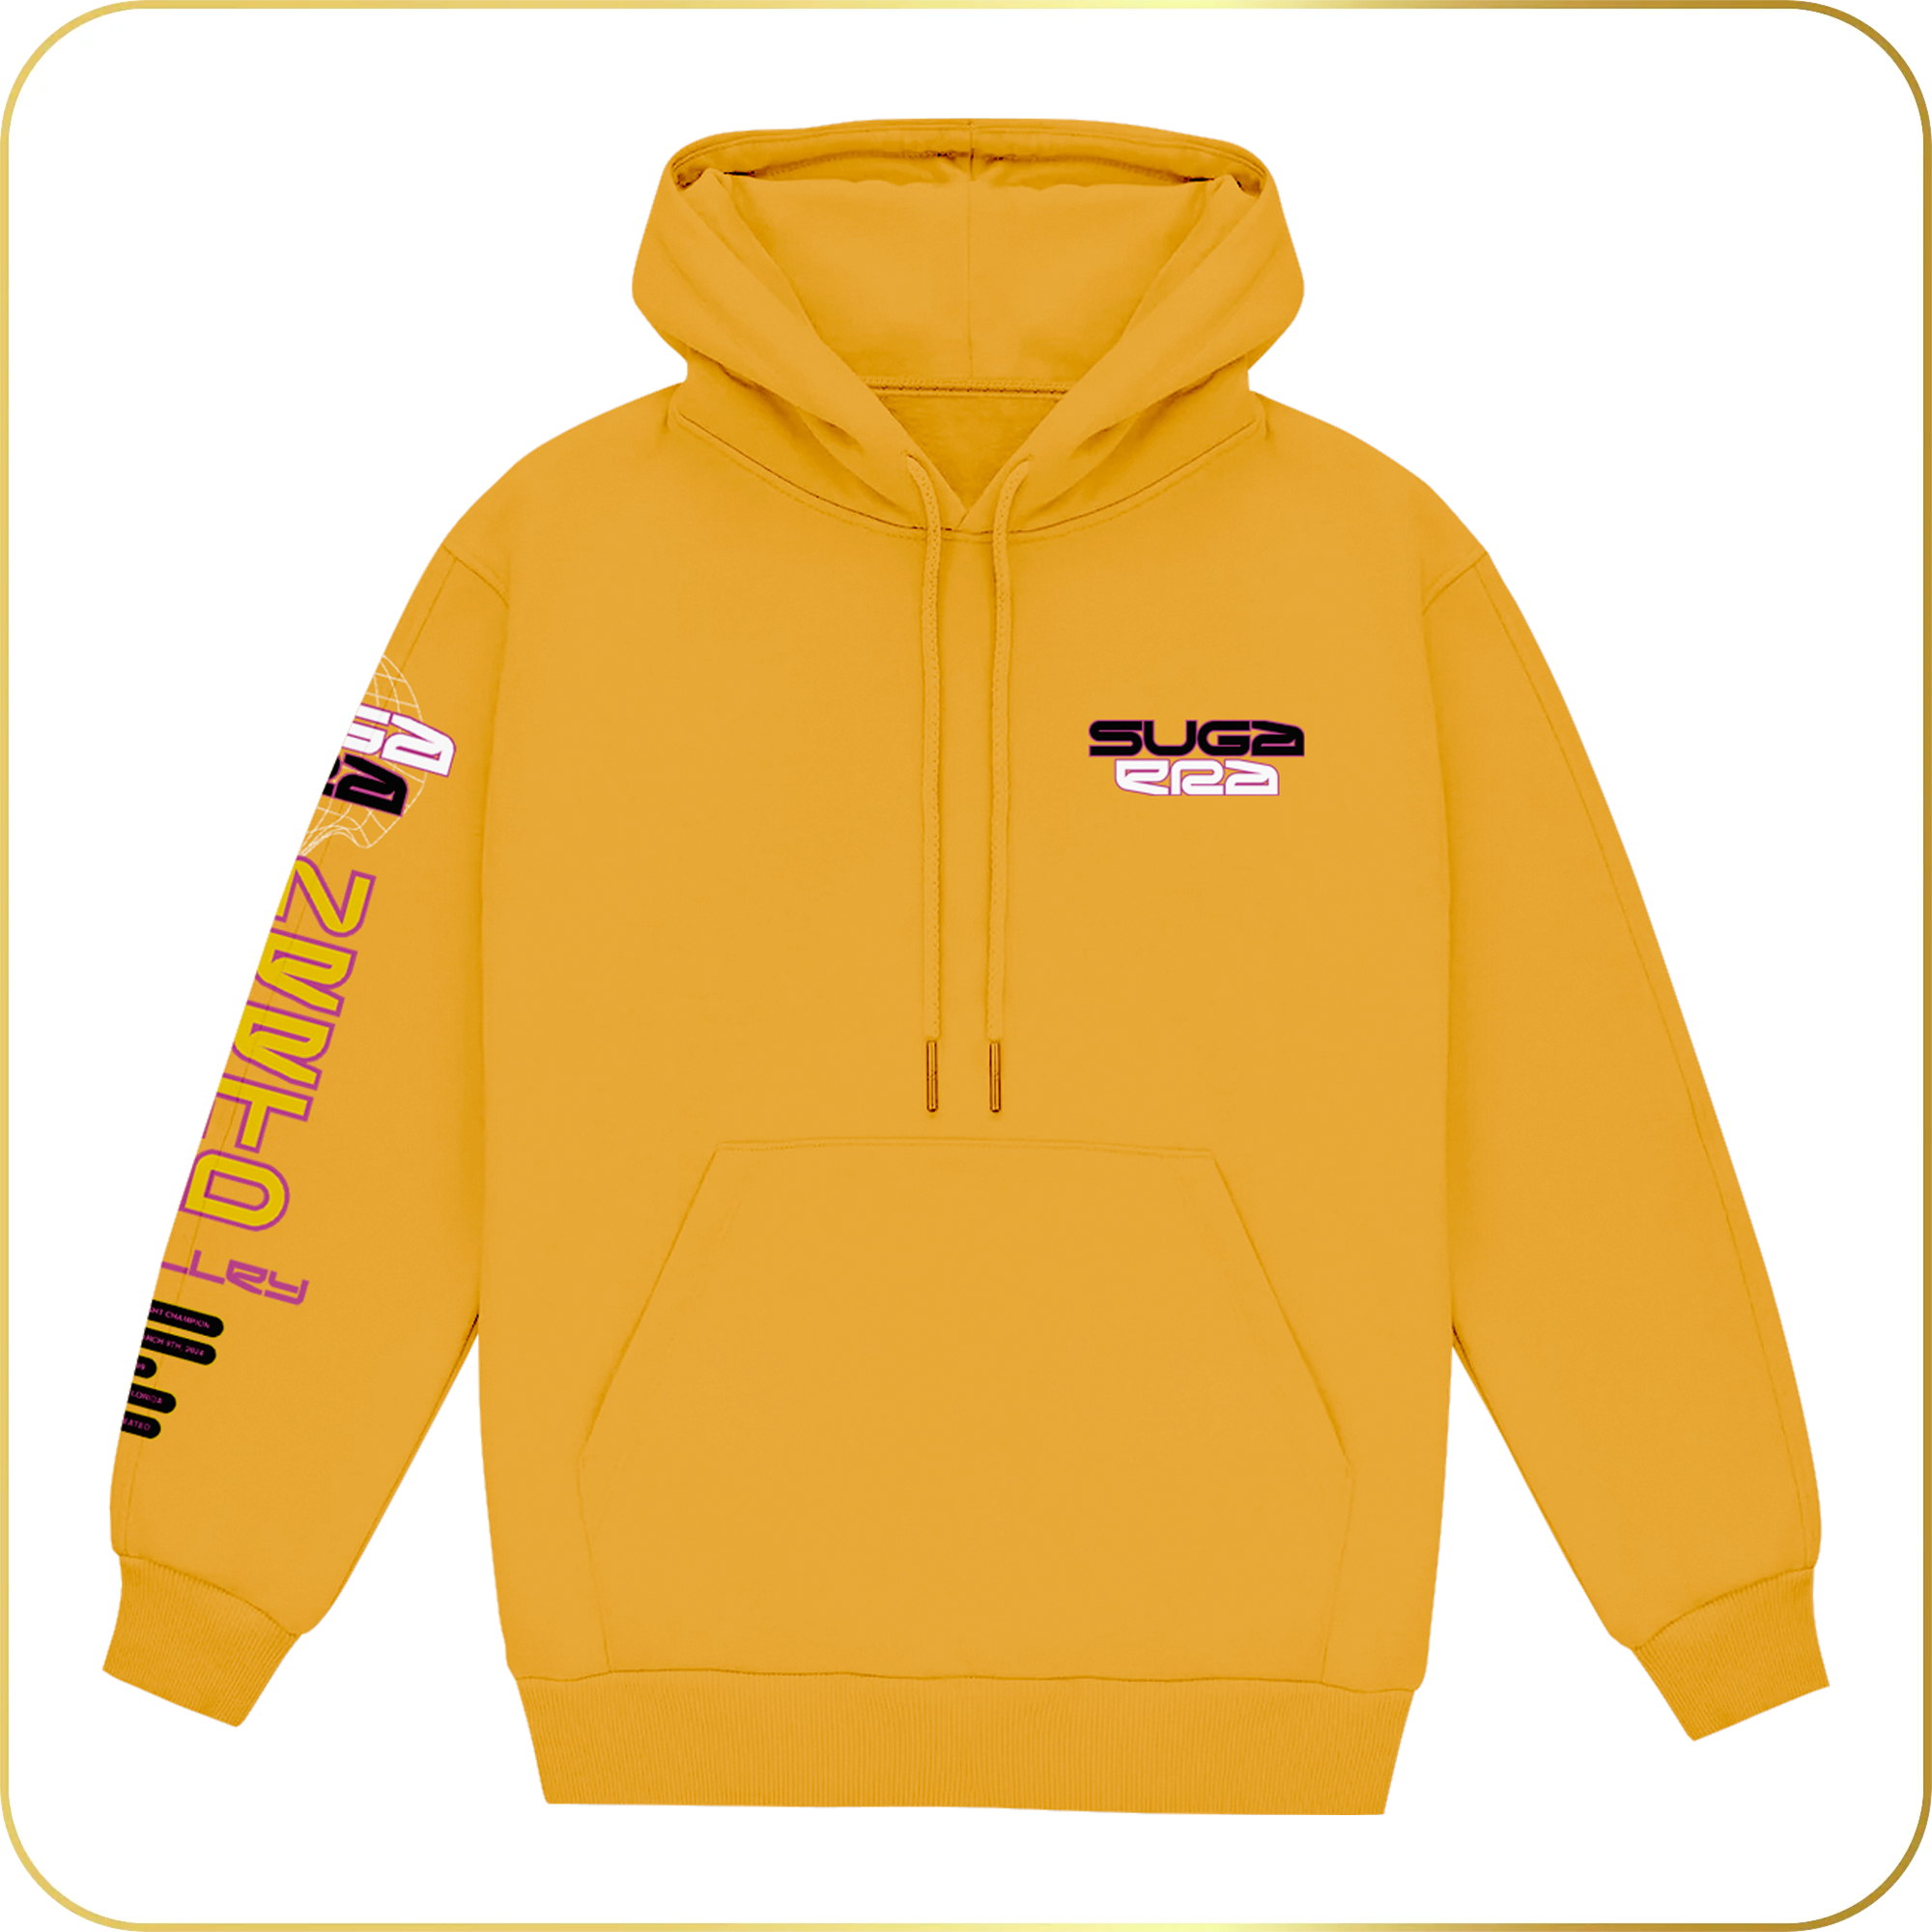 The Reign Remains Gold Hoodie